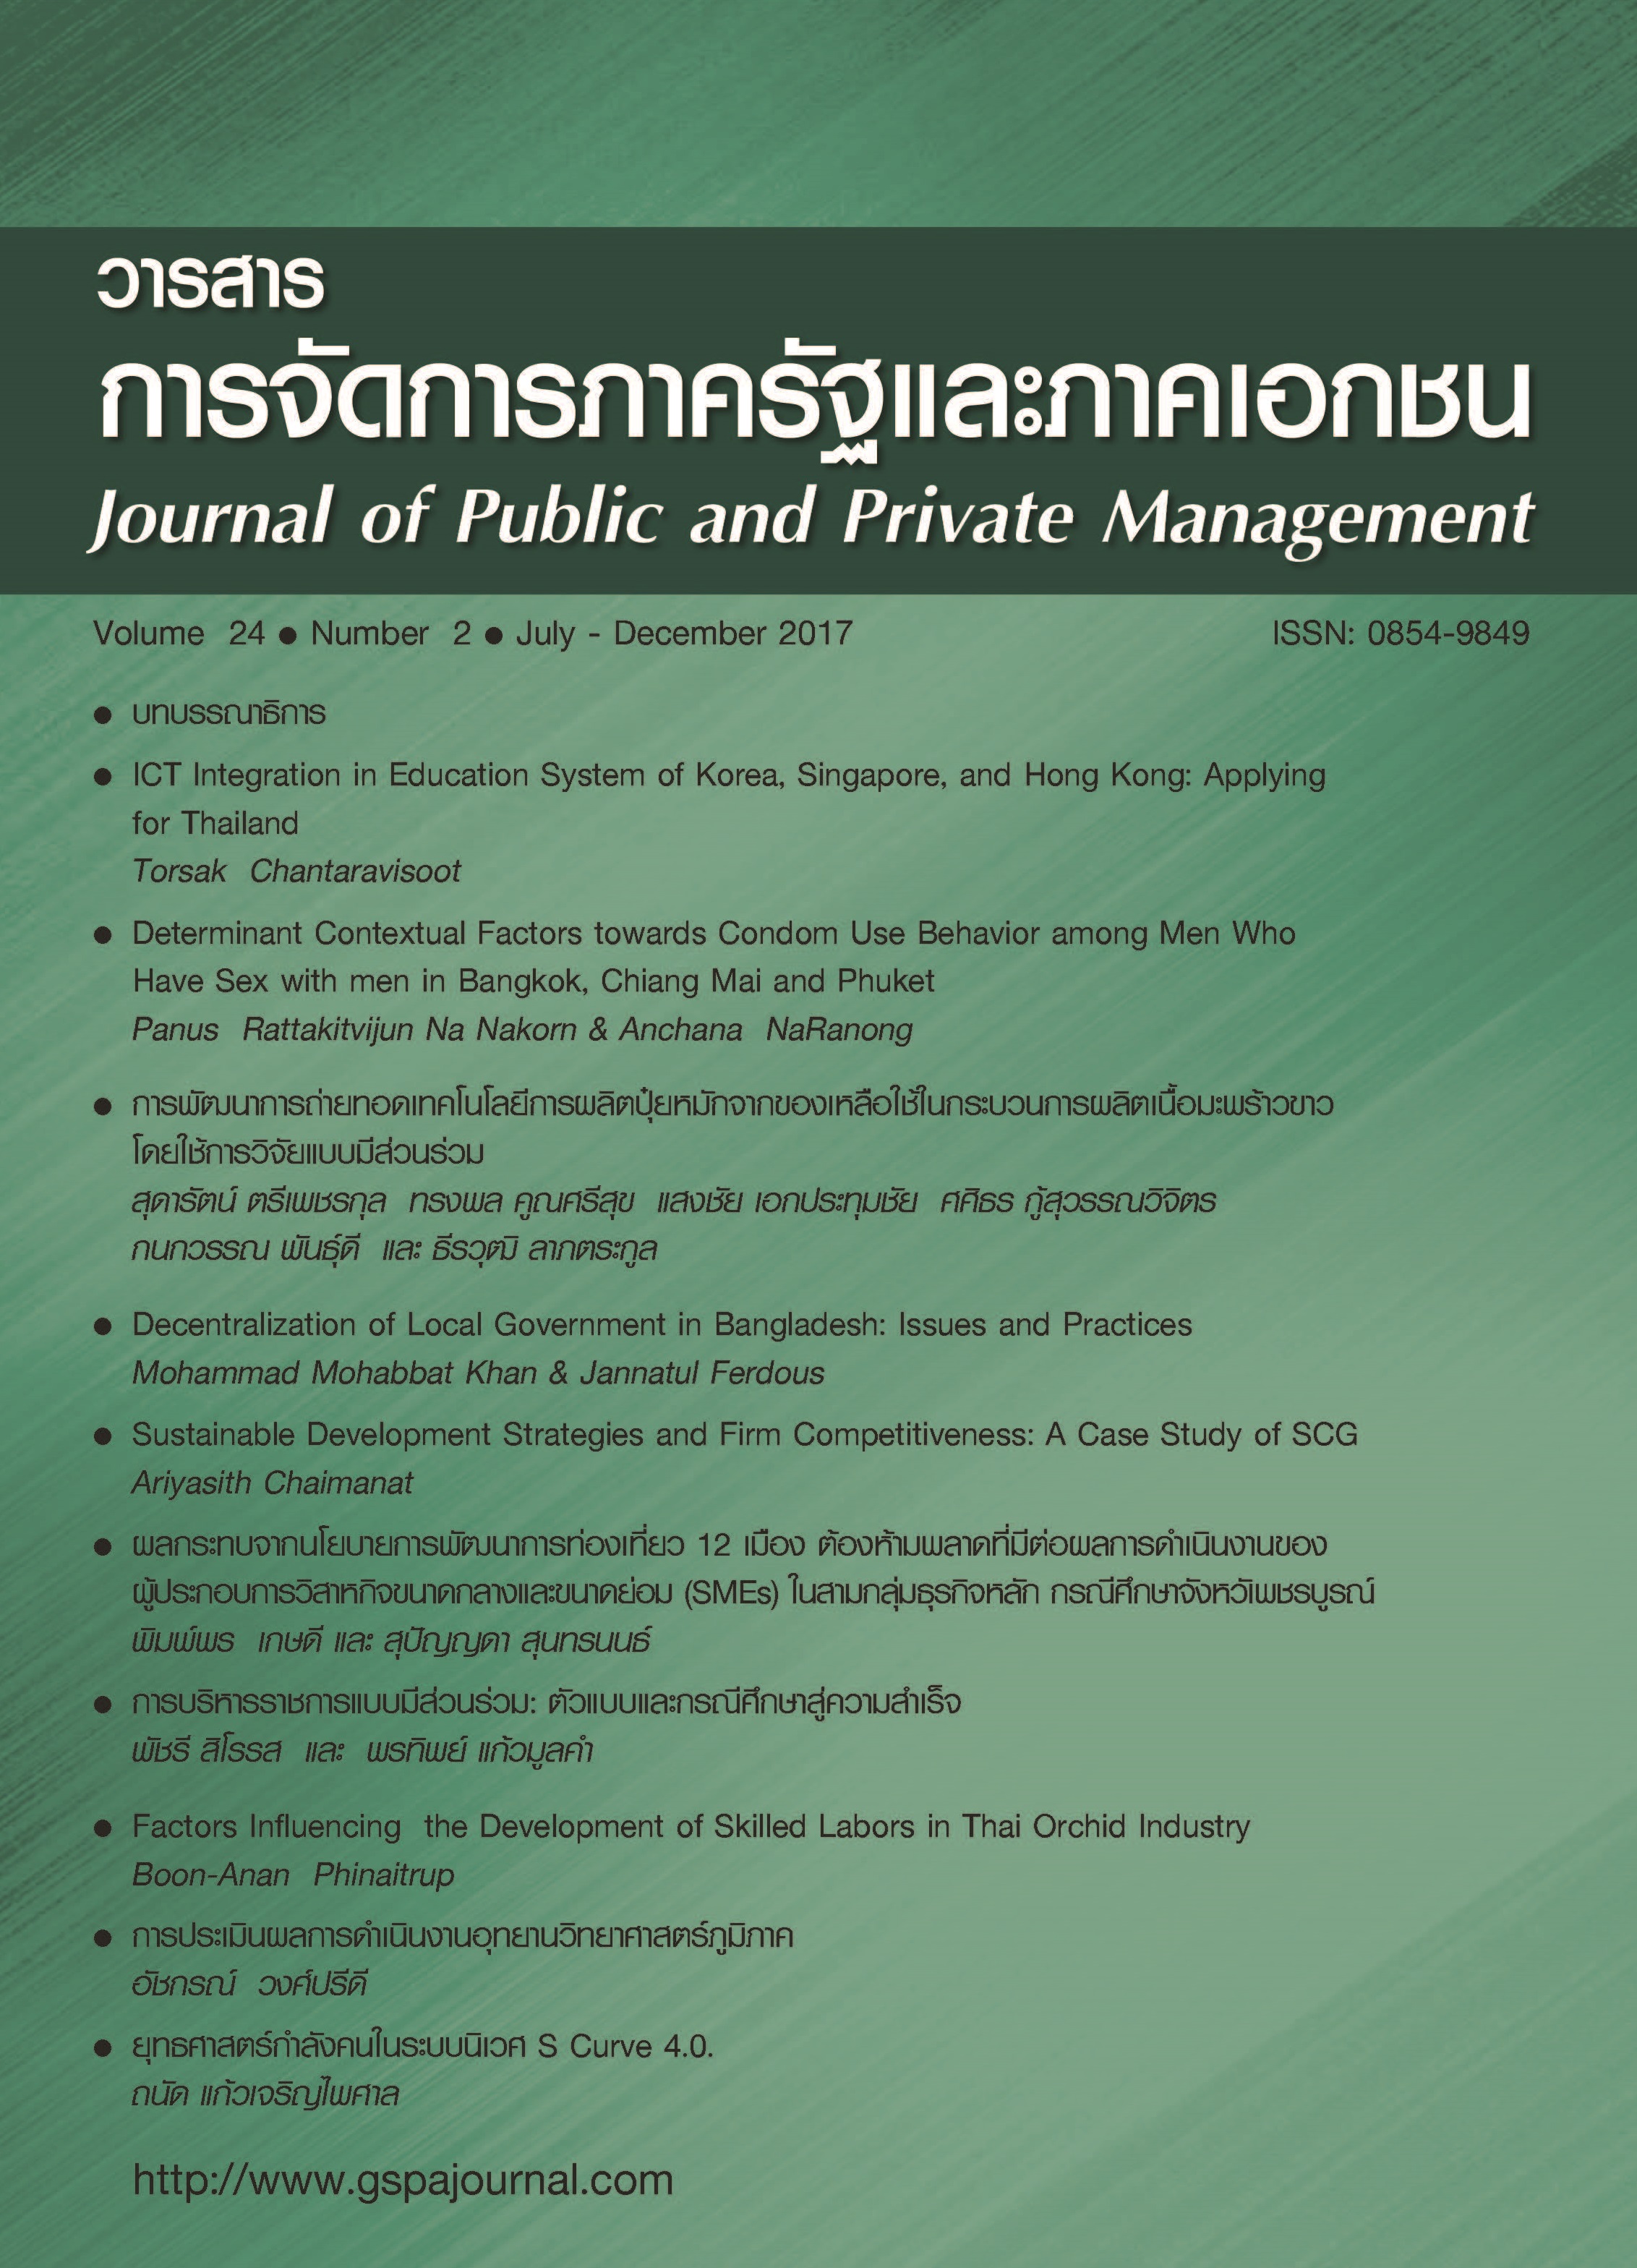 					View Vol. 24 No. 2 (2017): Journal of Public and Private Management Volume 24 Number 2
				